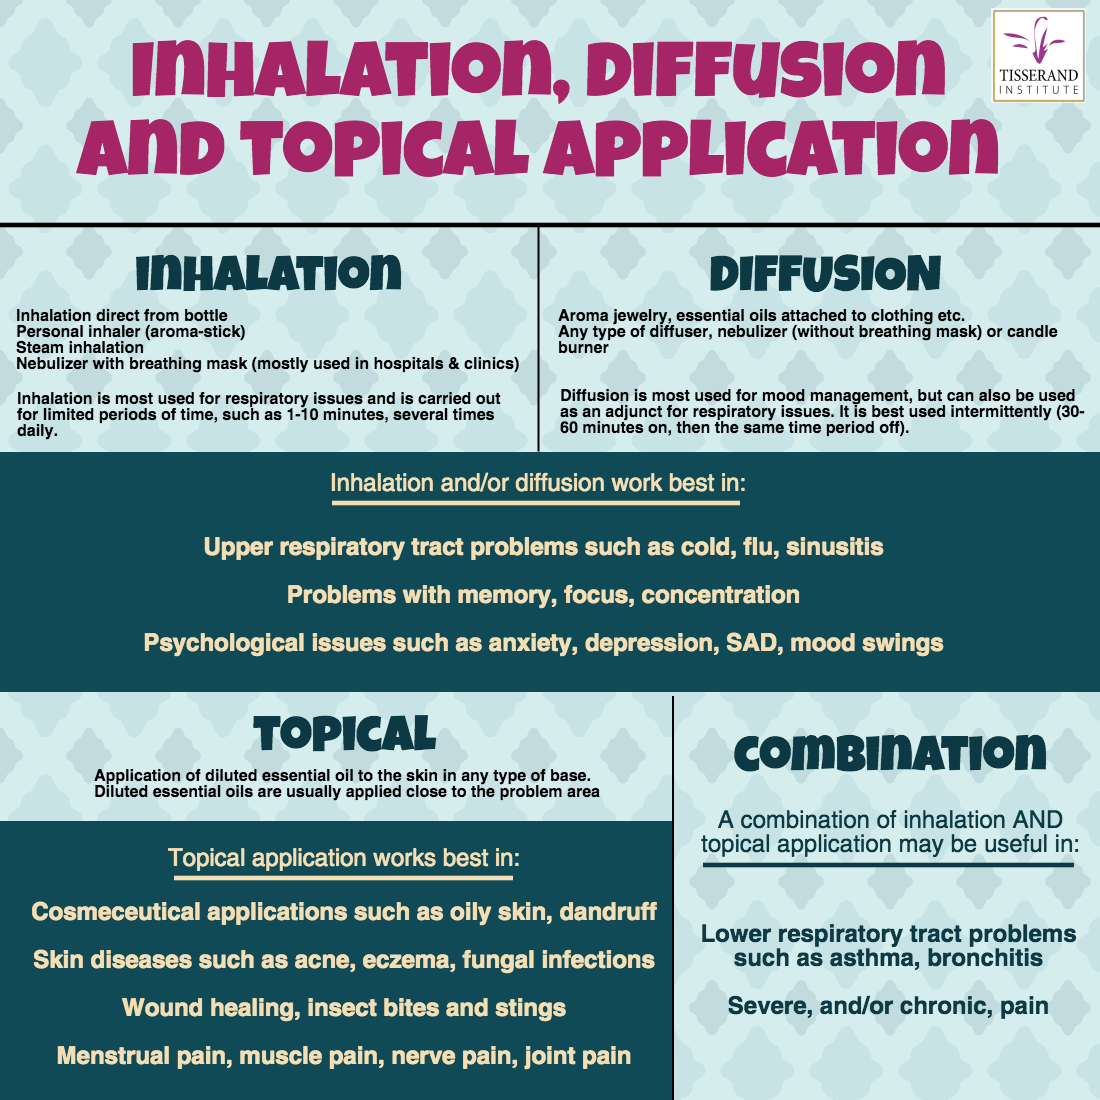 Essential Oil Applications | Inhalation, Diffusion and Topical Applications